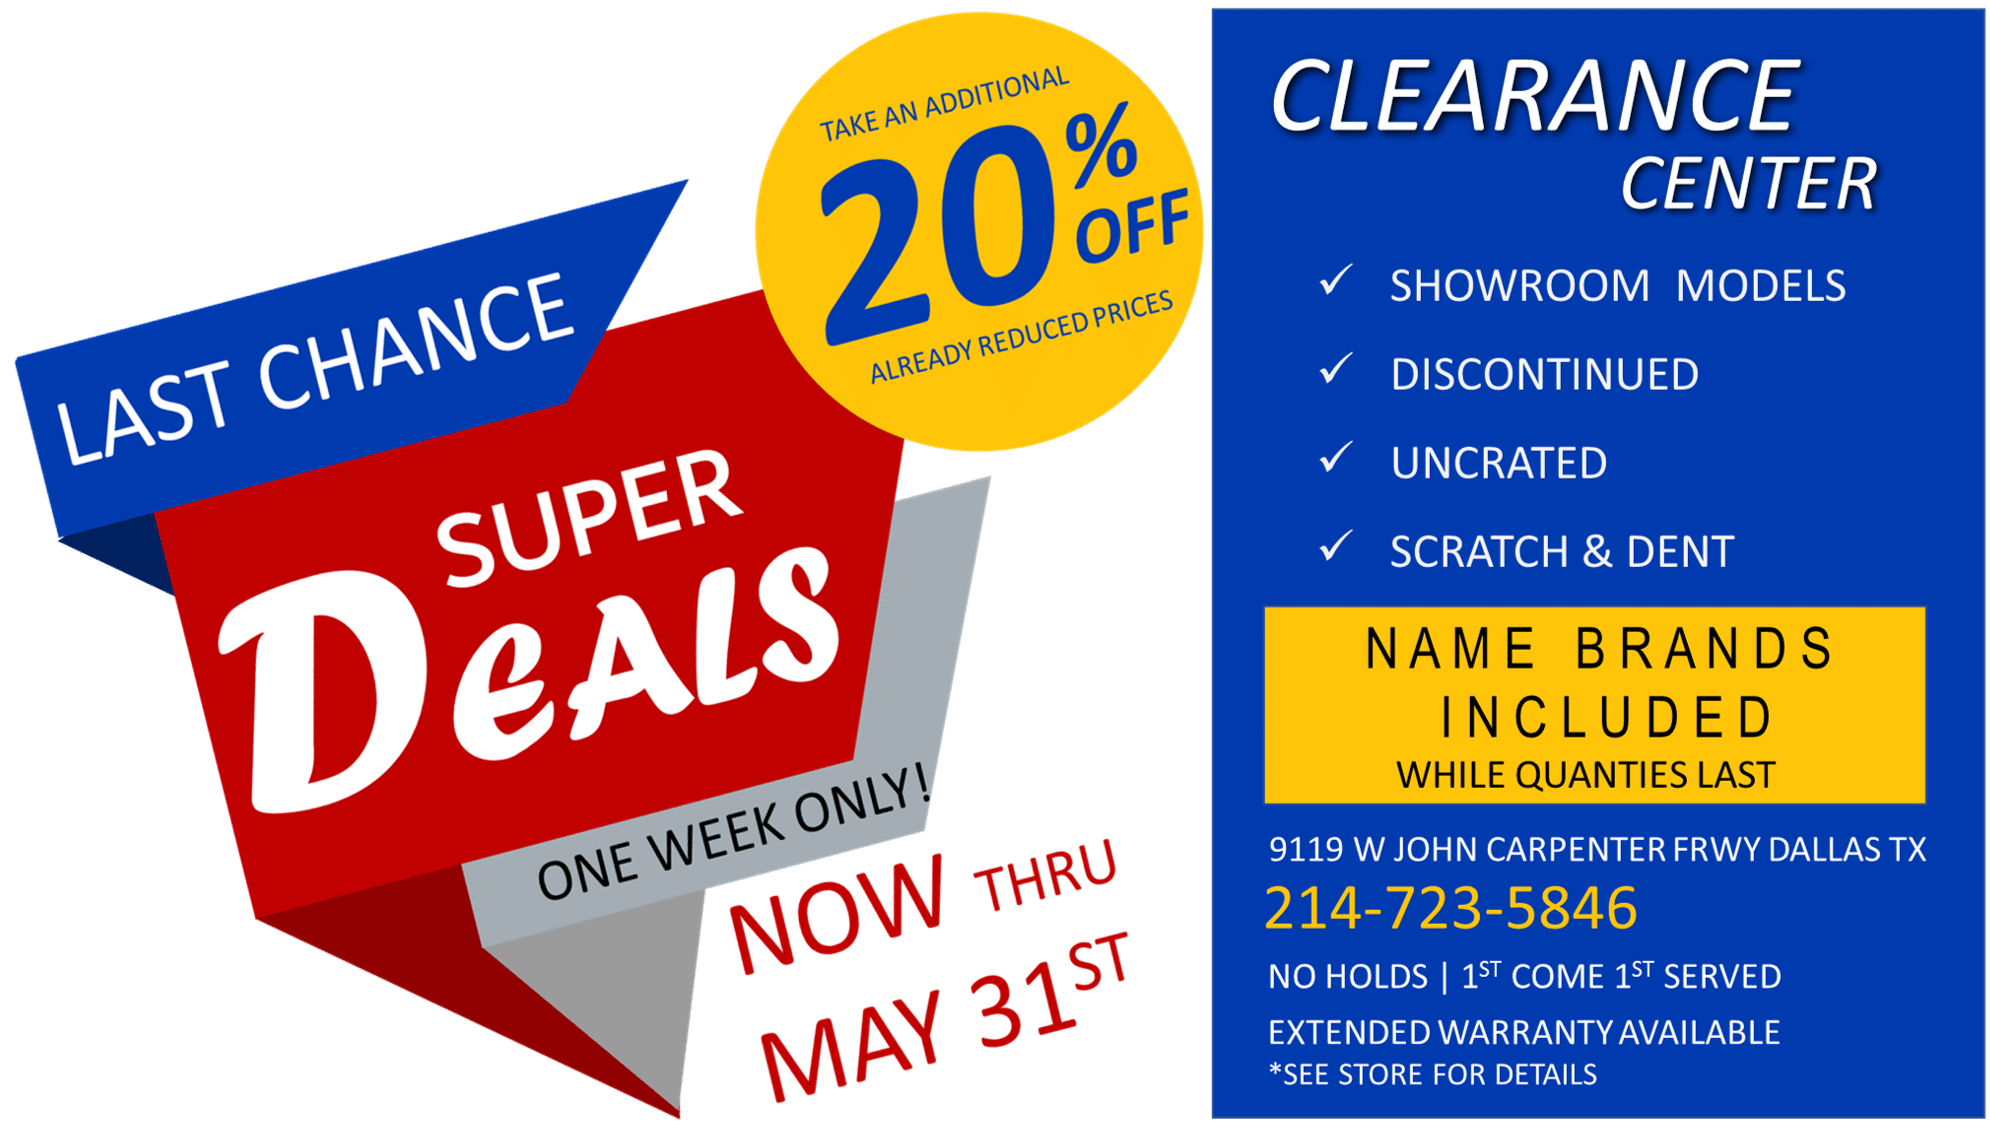 LAST CHANCE to SAVE! Extra 20% Off ends May 31st! - Capital Distributing